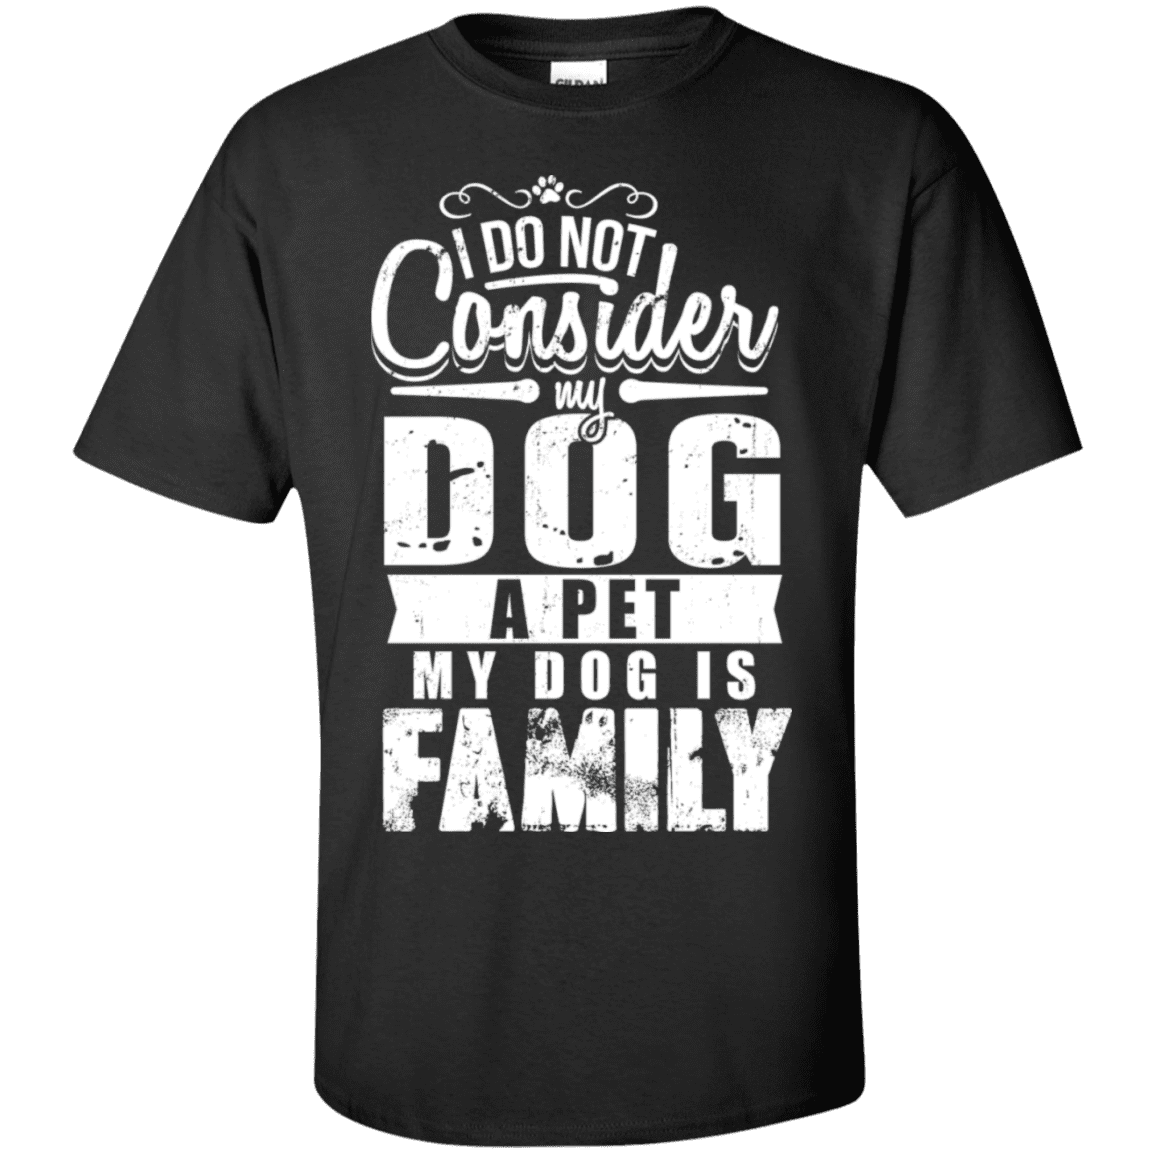 My Dog Is Family - T Shirt.